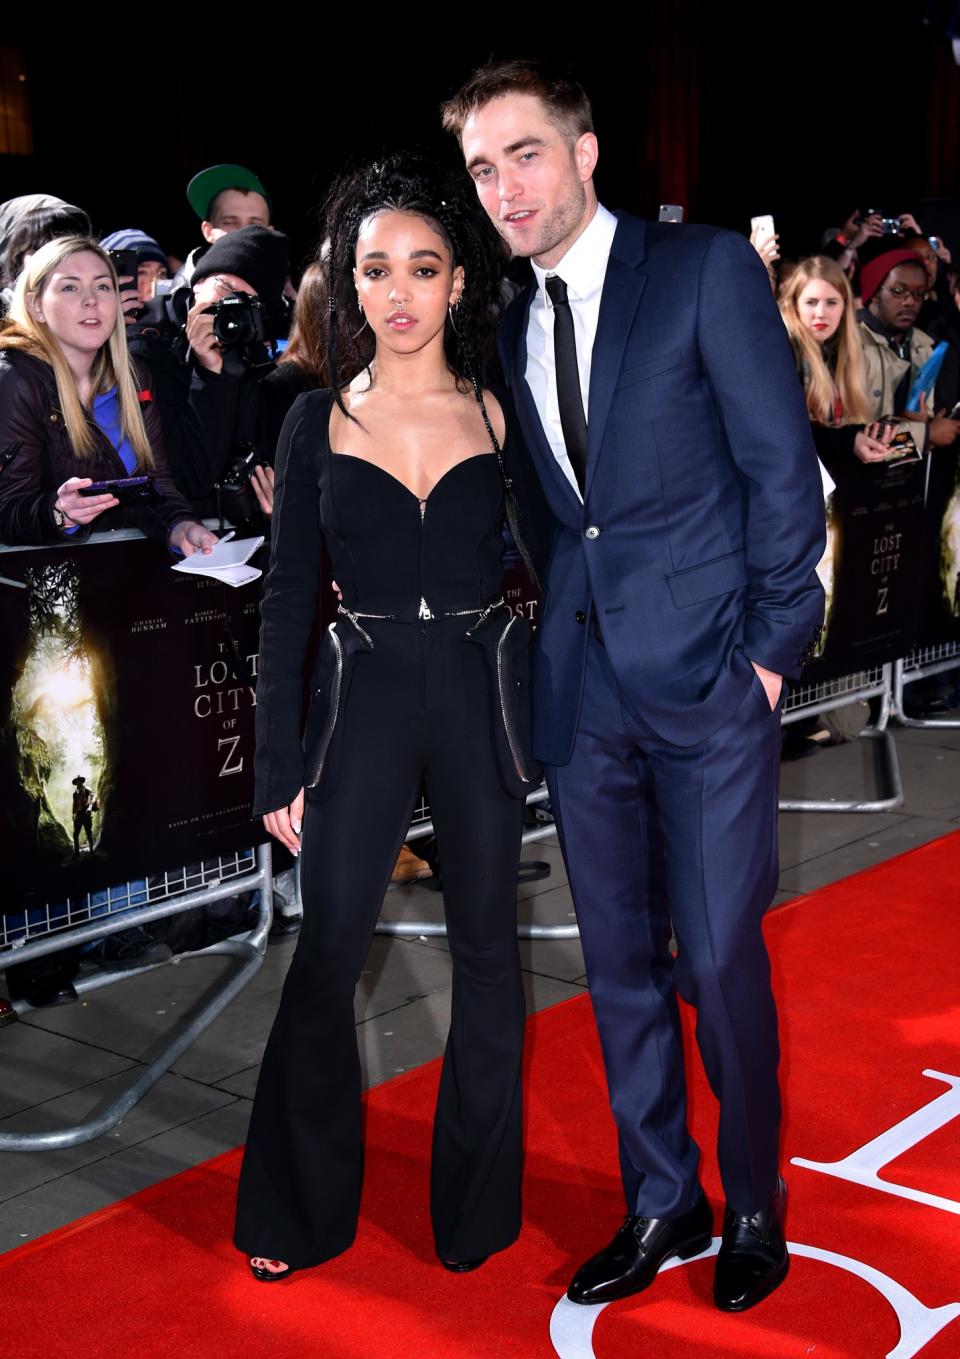 HIT: FKA Twigs at The Lost City of Z premiere